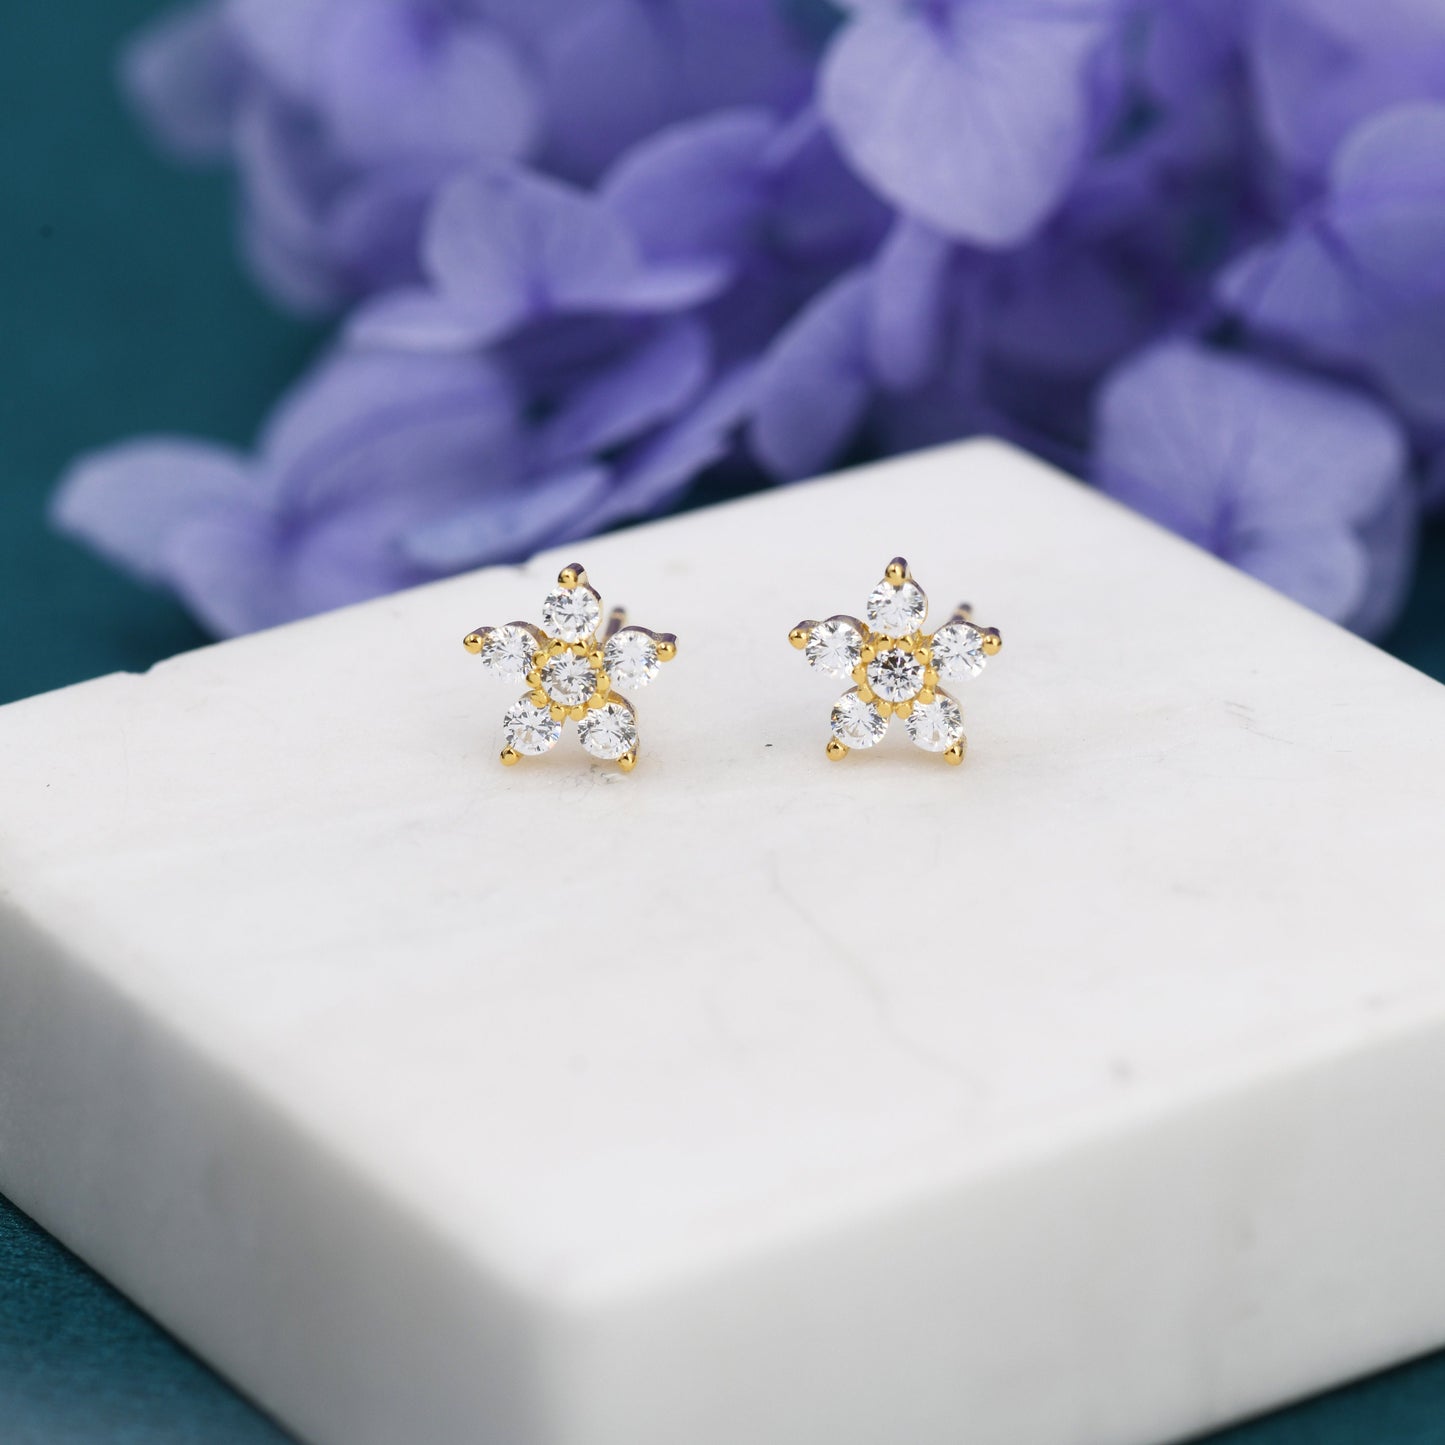 Very Sparkly Forget-me-not Flower Dainty Stud Earrings in Sterling Silver with CZ Crystals, Nature Inspired Design, Delicate and Pretty